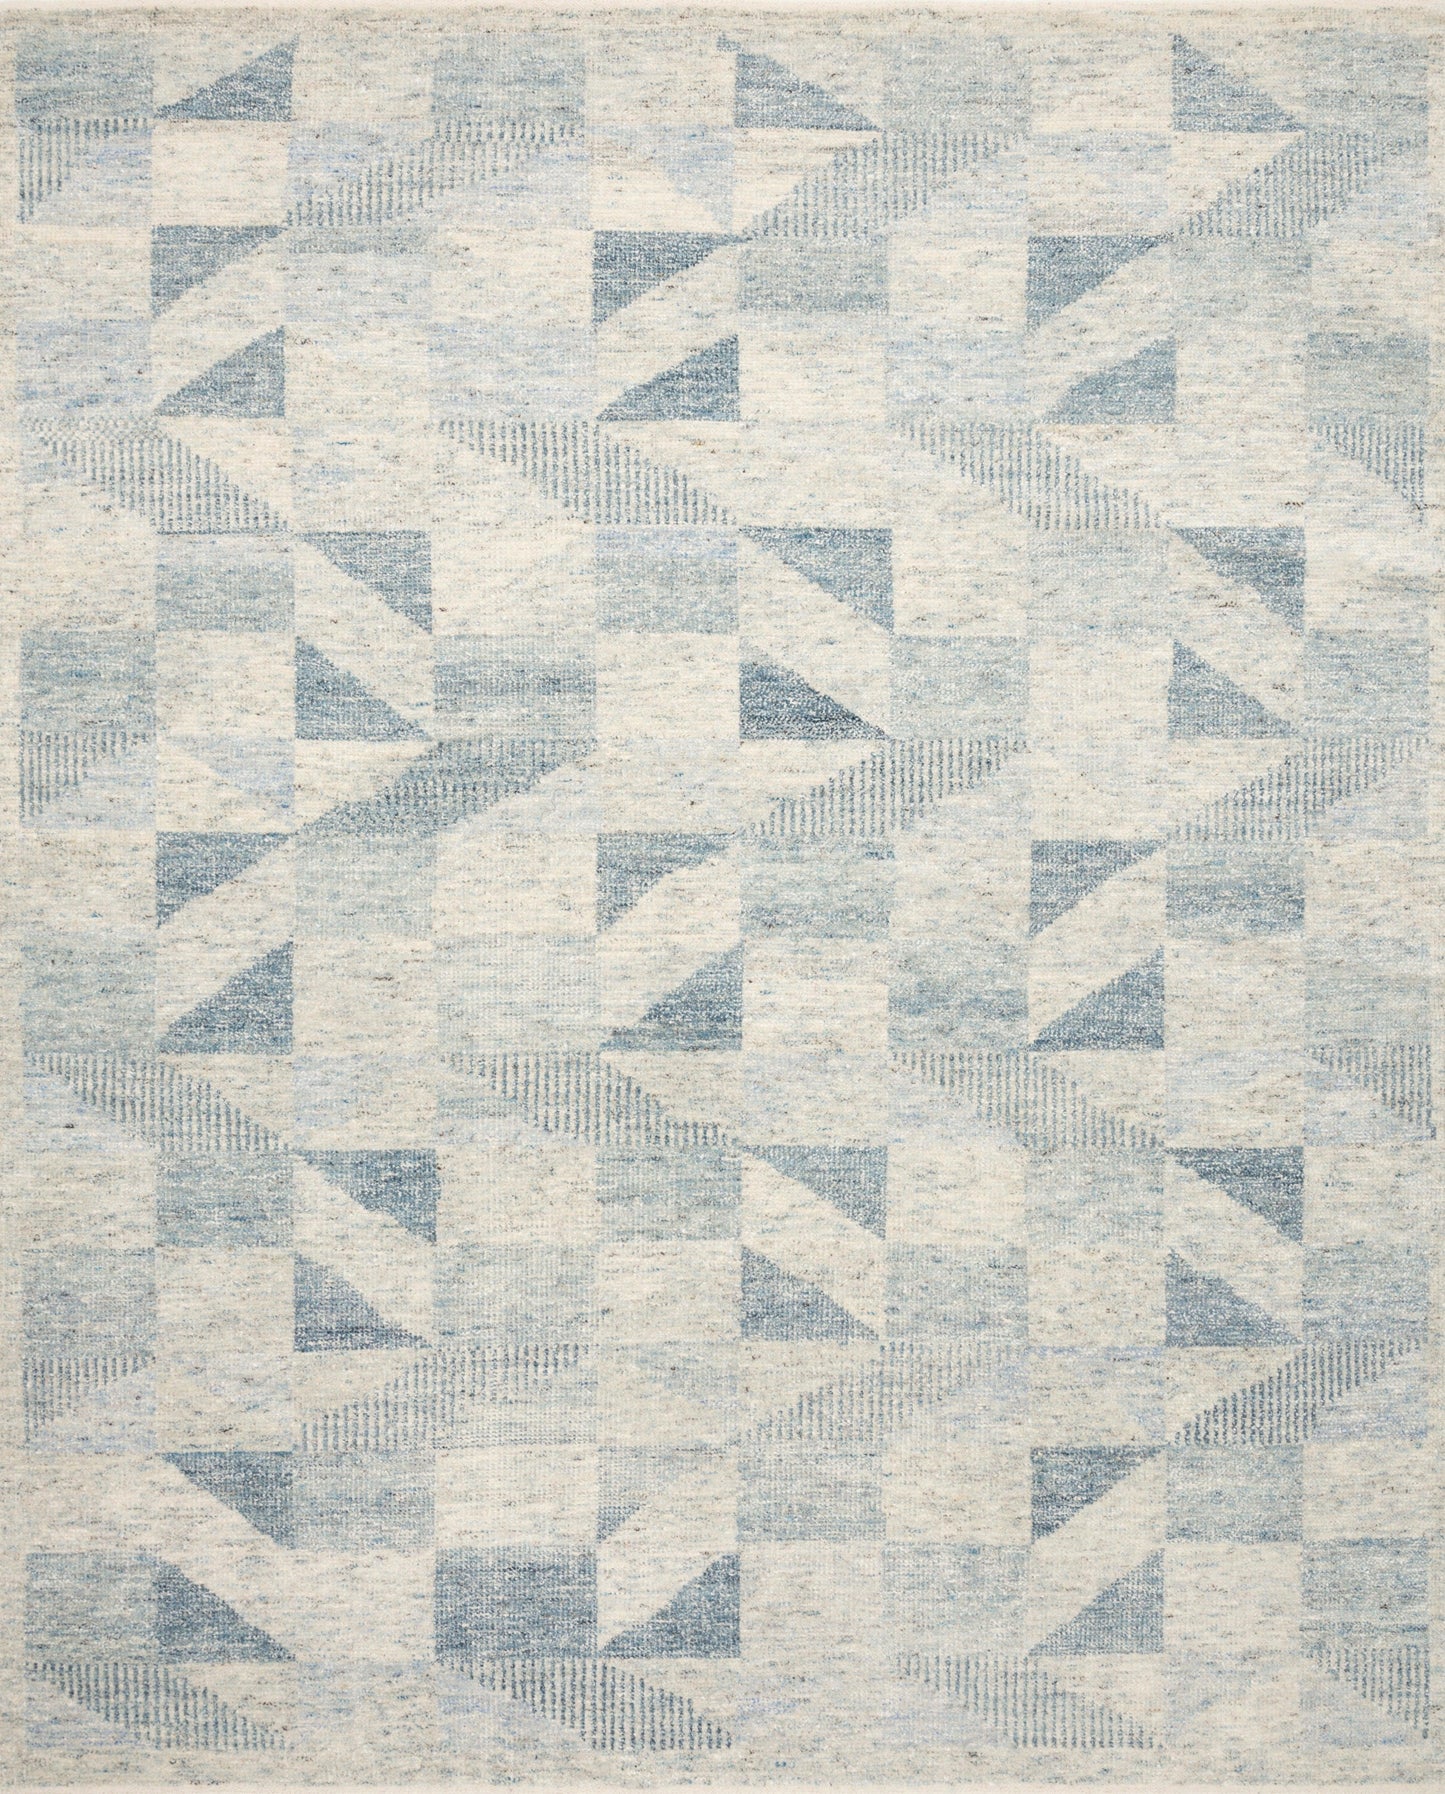 The Mabelle Rug